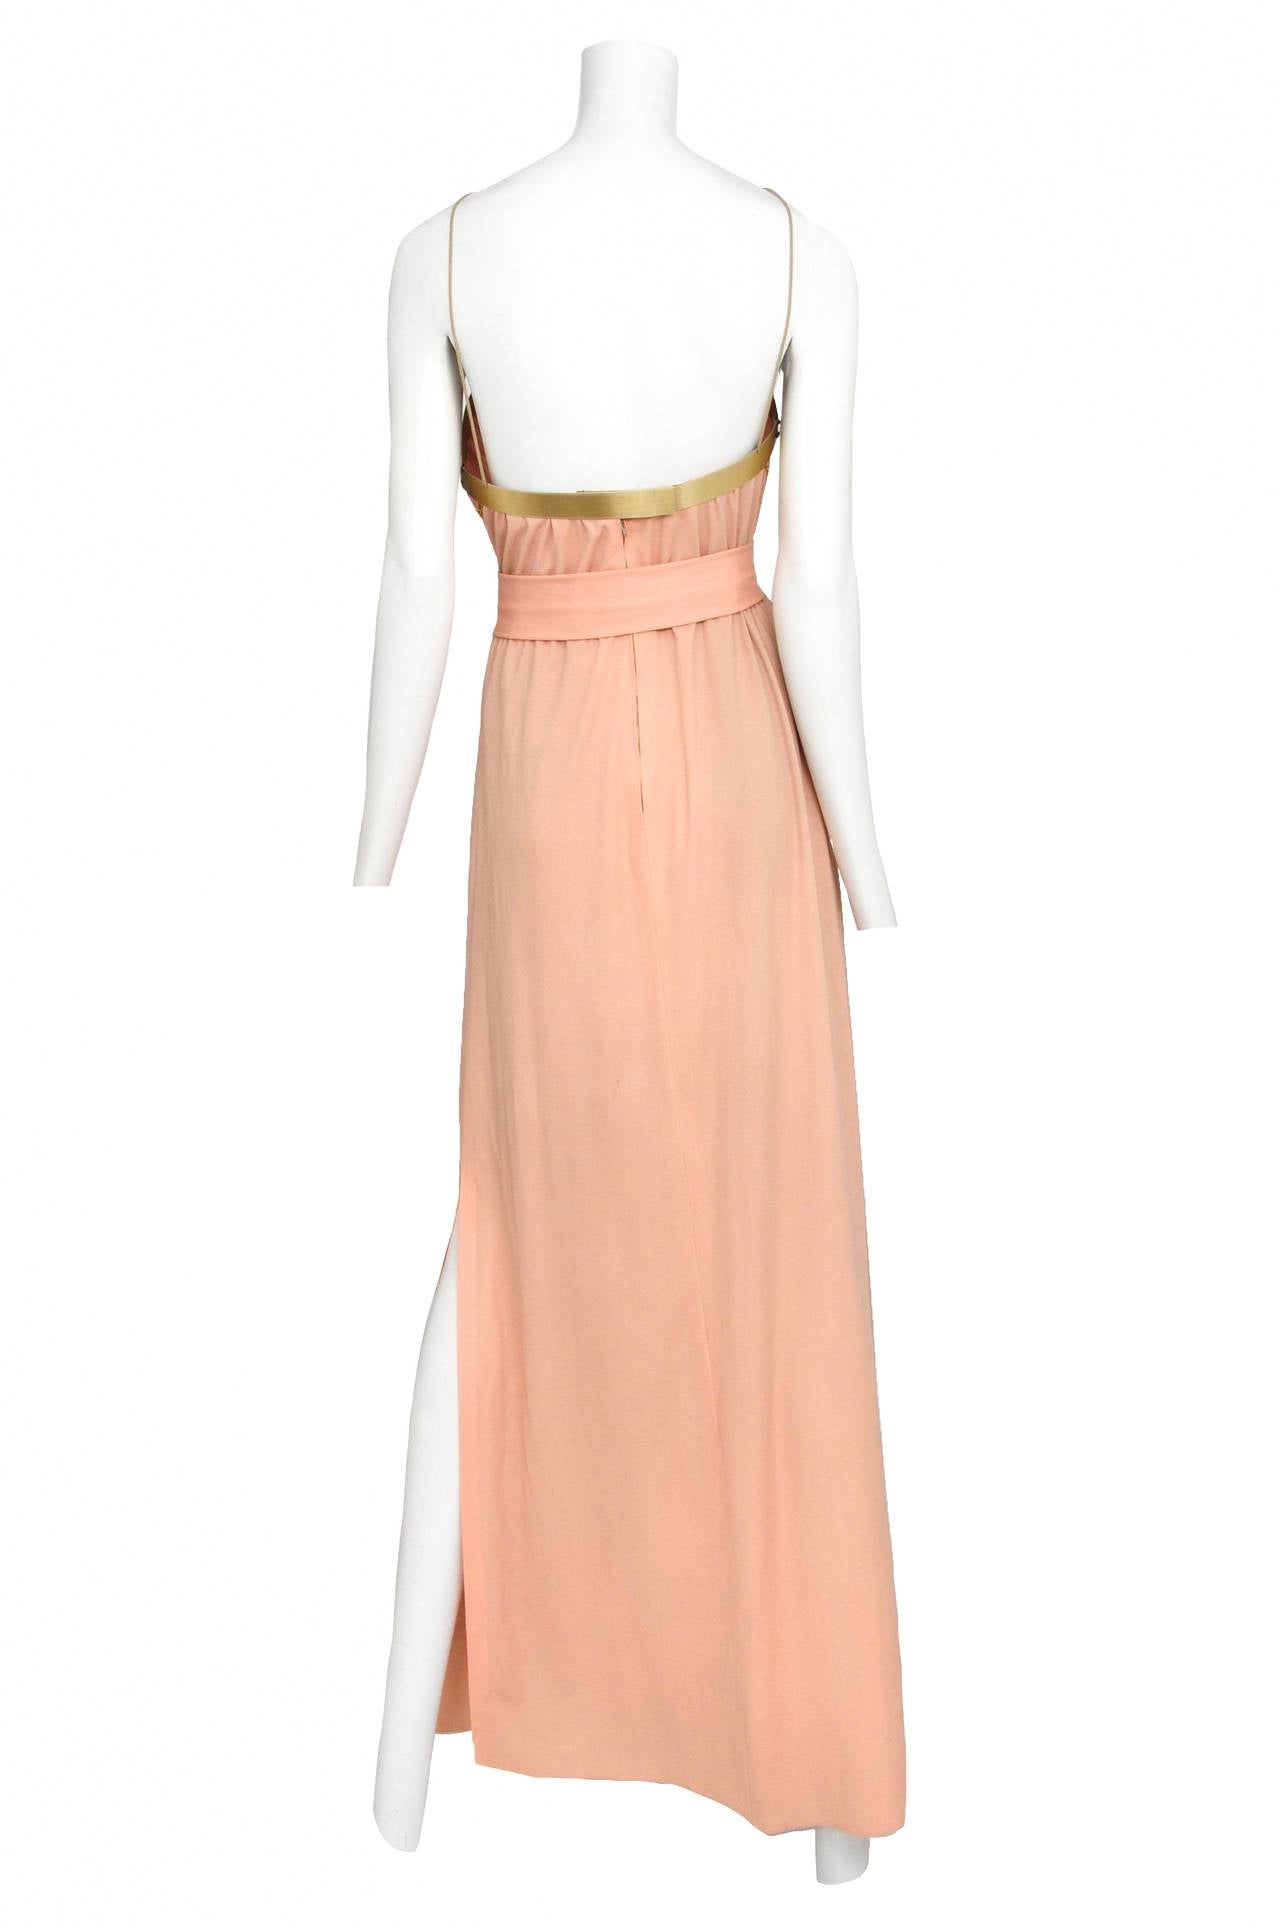 Vintage Jacques Cassia peach halter belted gown featuring architectural brass panels at the neckline, orange and brass detailing on the belt buckle and center chest panel, and gold chains adorning the bust of the dress. Circa 1970's.